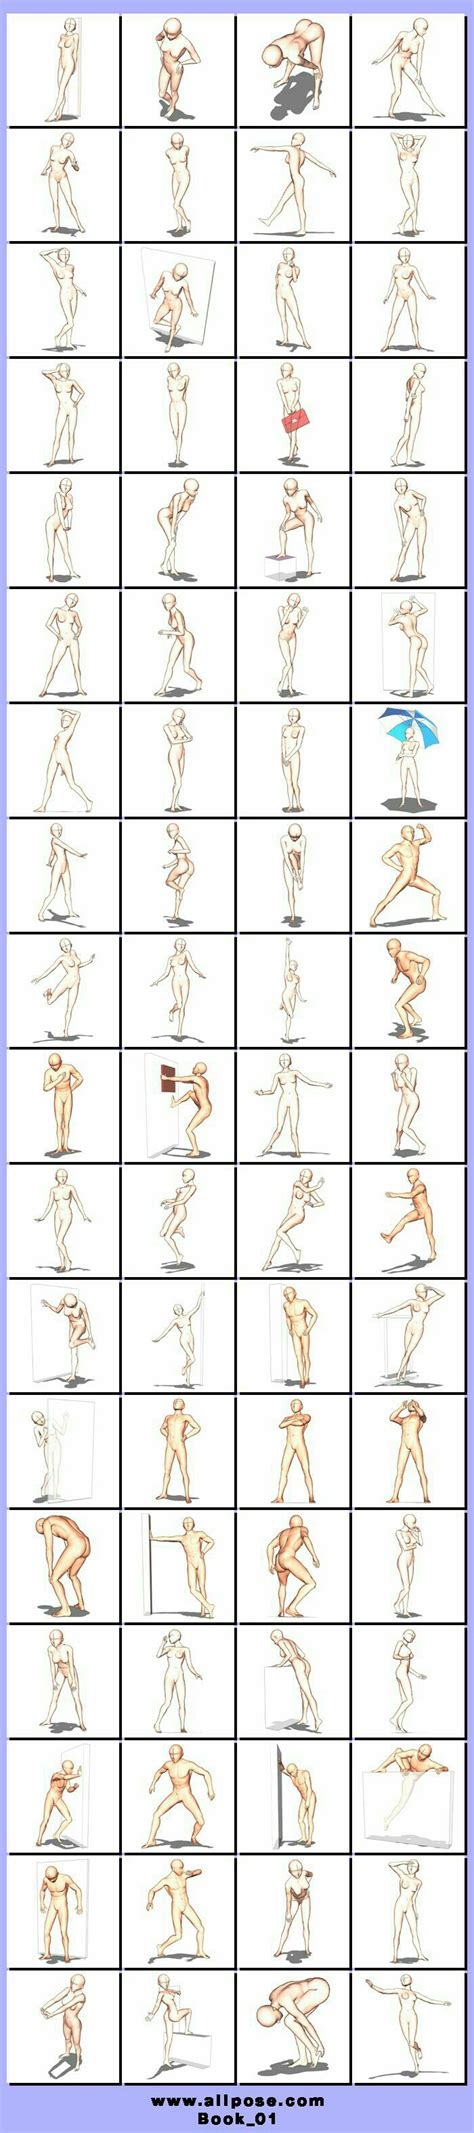 Body Positions Text How To Draw Manga Anime Drawing Techniques